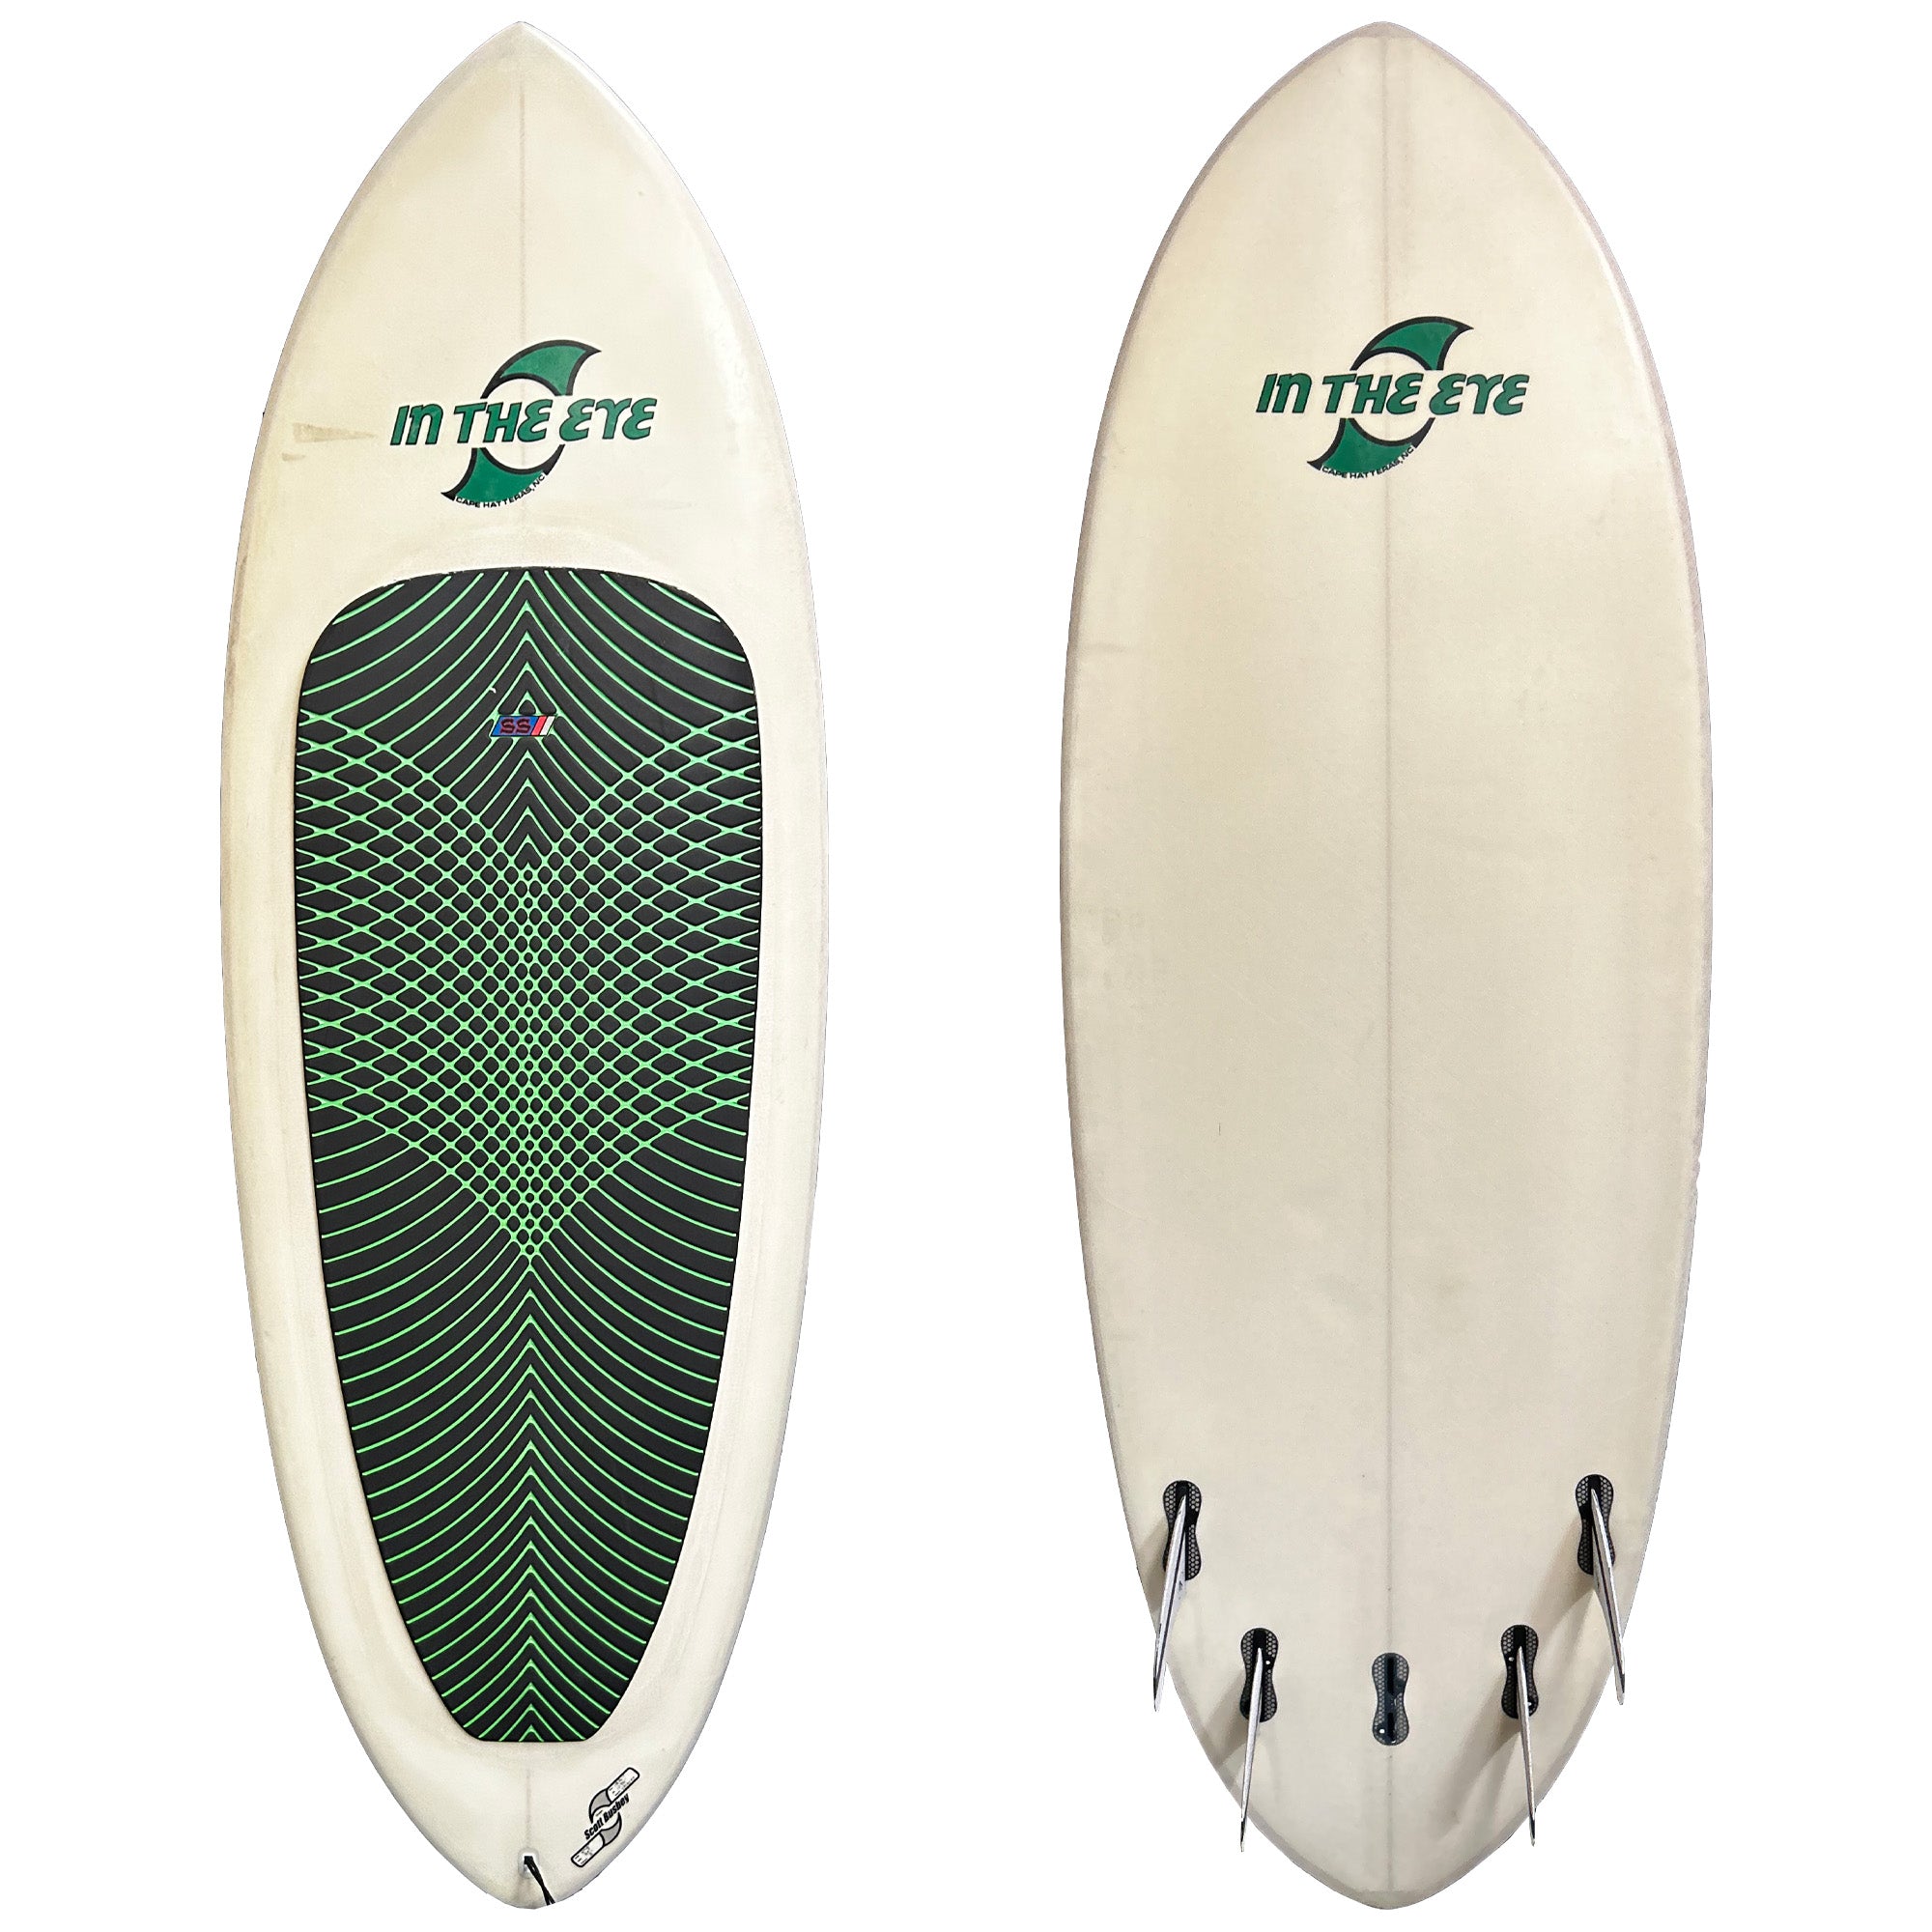 In the Eye 6'2 Consignment Knee Board Surfboard